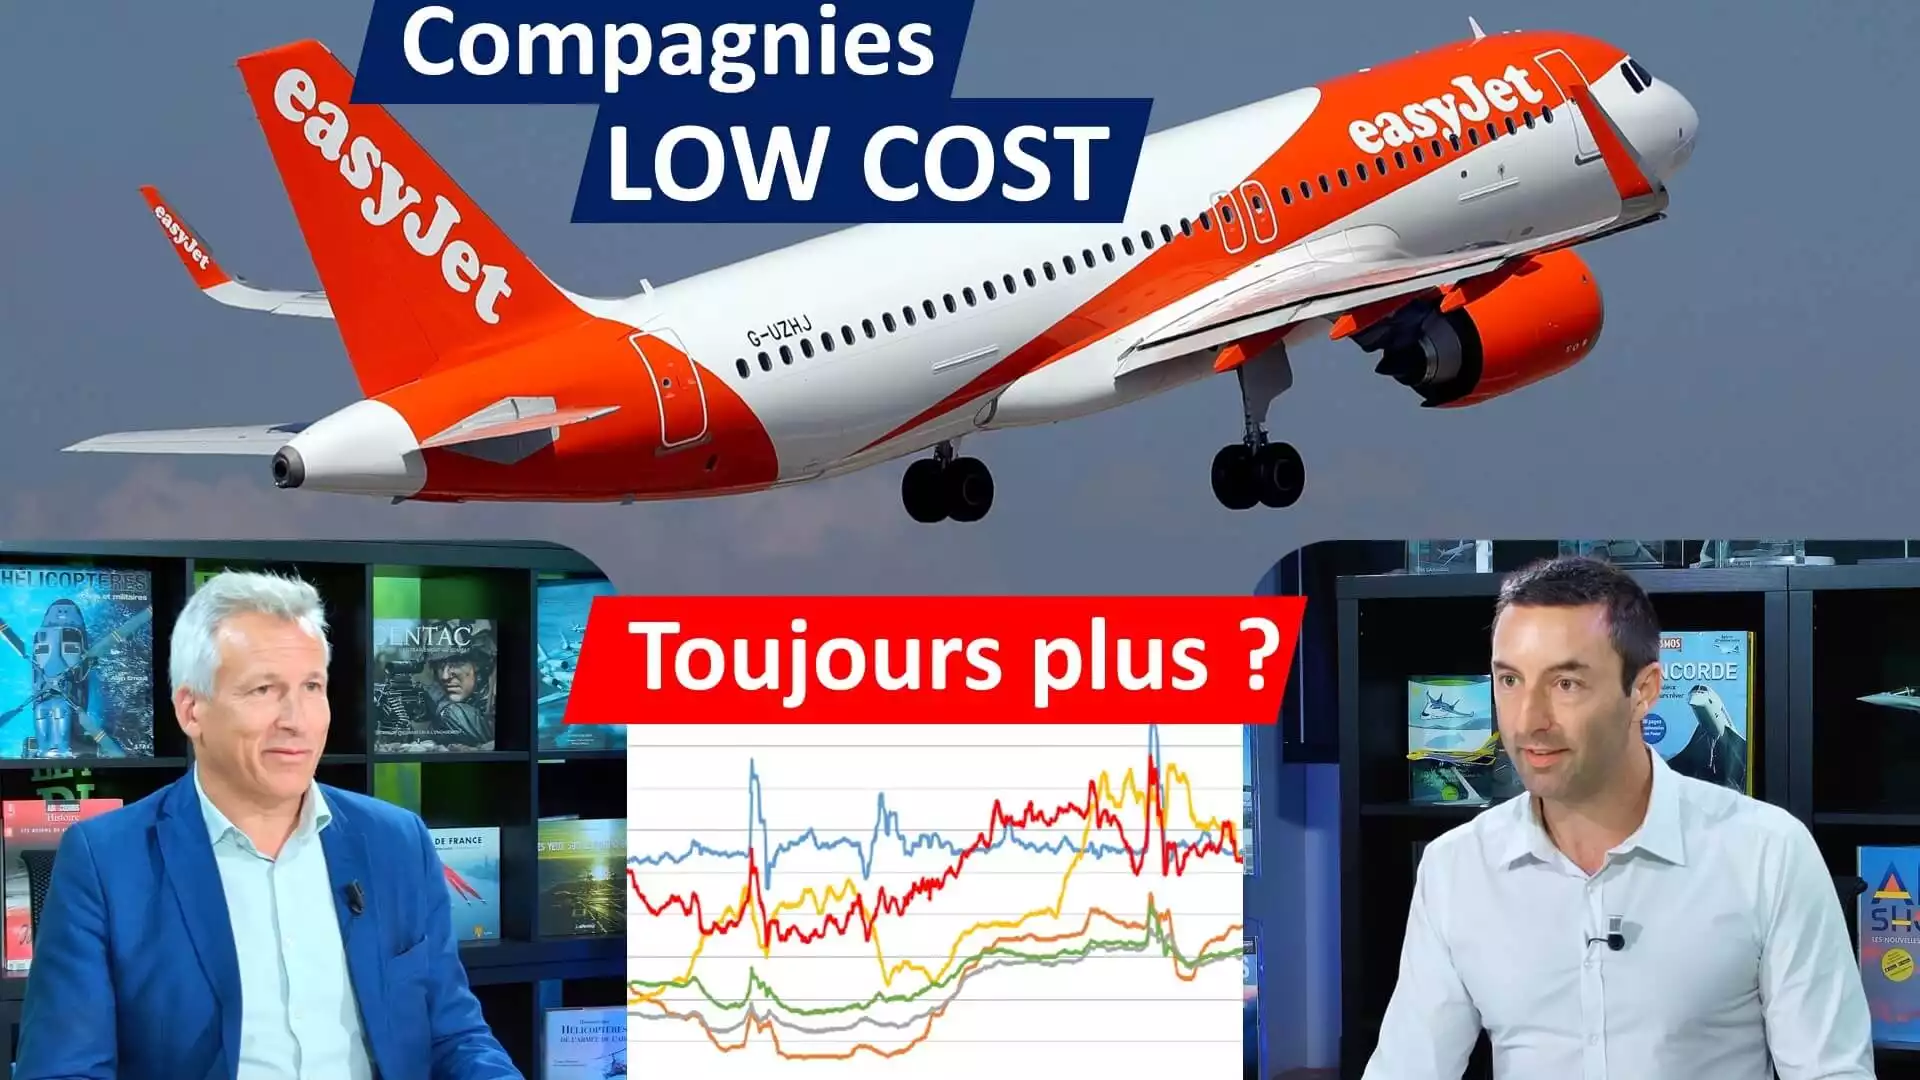 Compagnies LOW COST: toujours moins cher, toujours plus de trafic ?